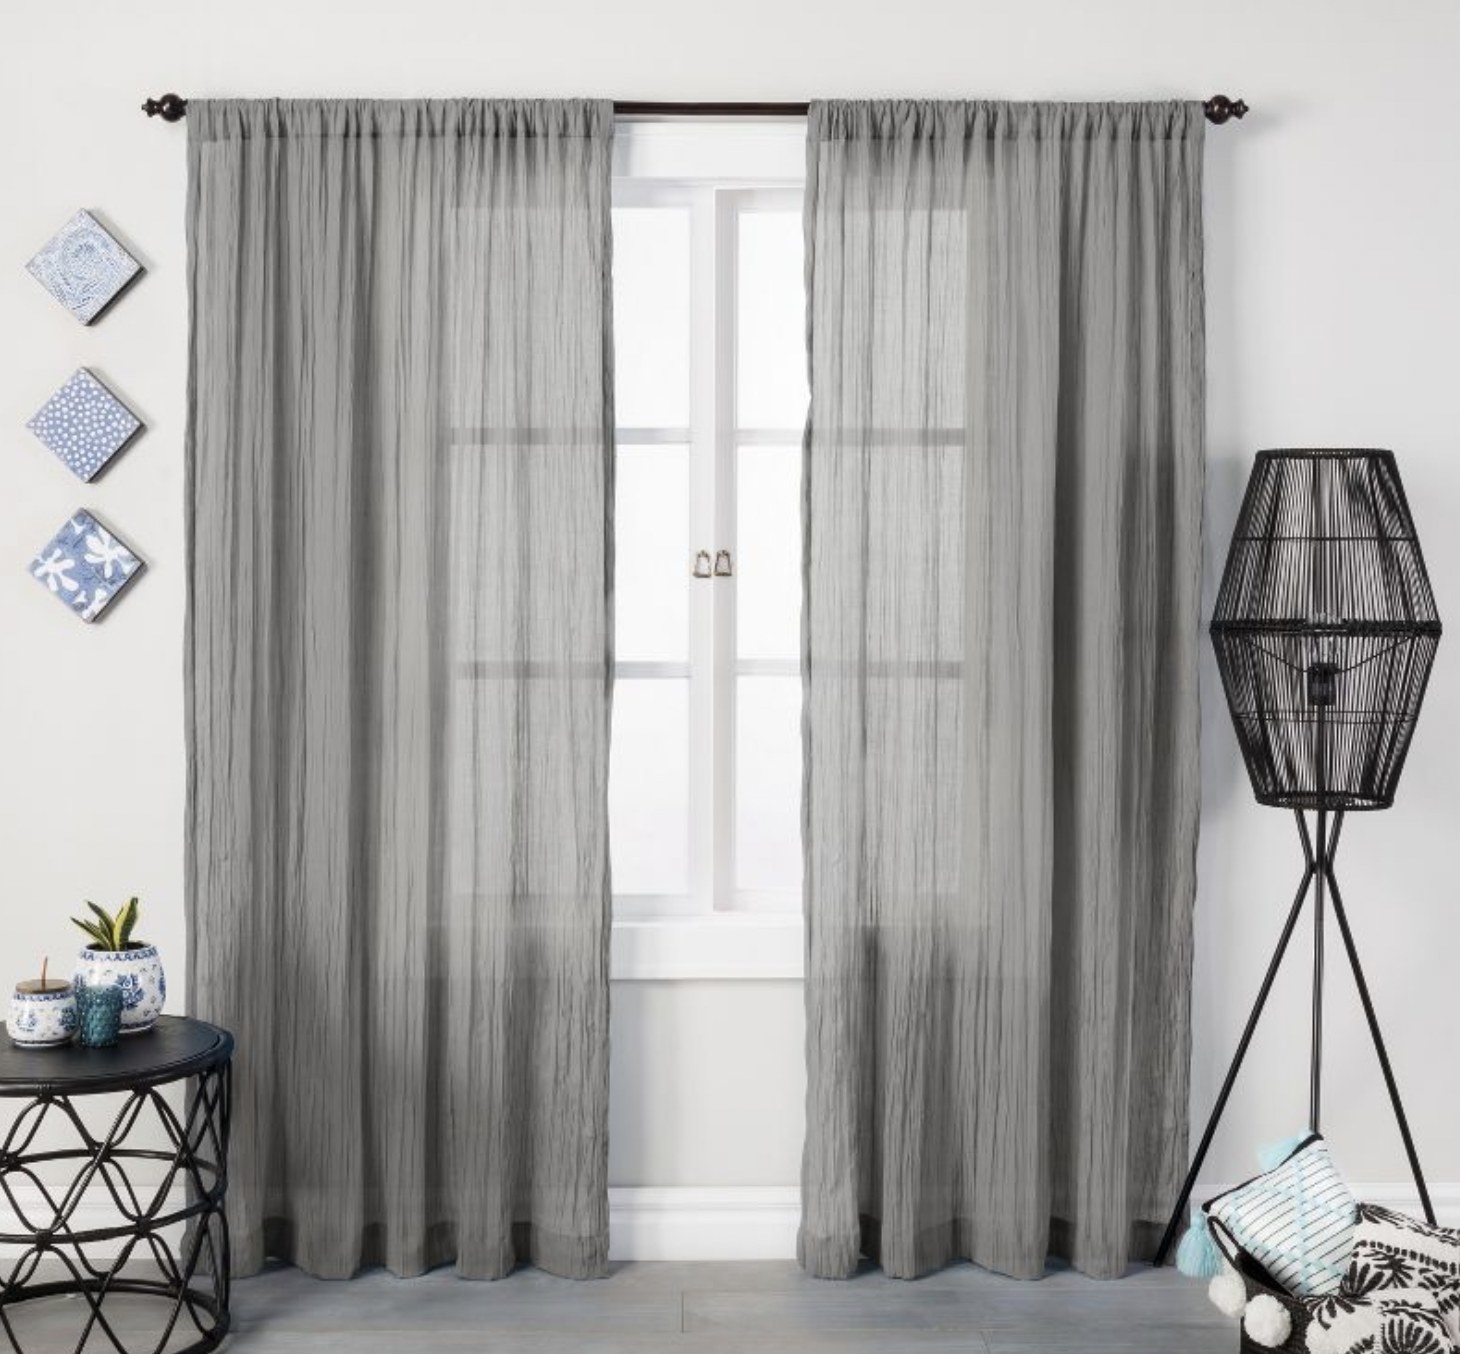 Two grey curtain panels framing a window